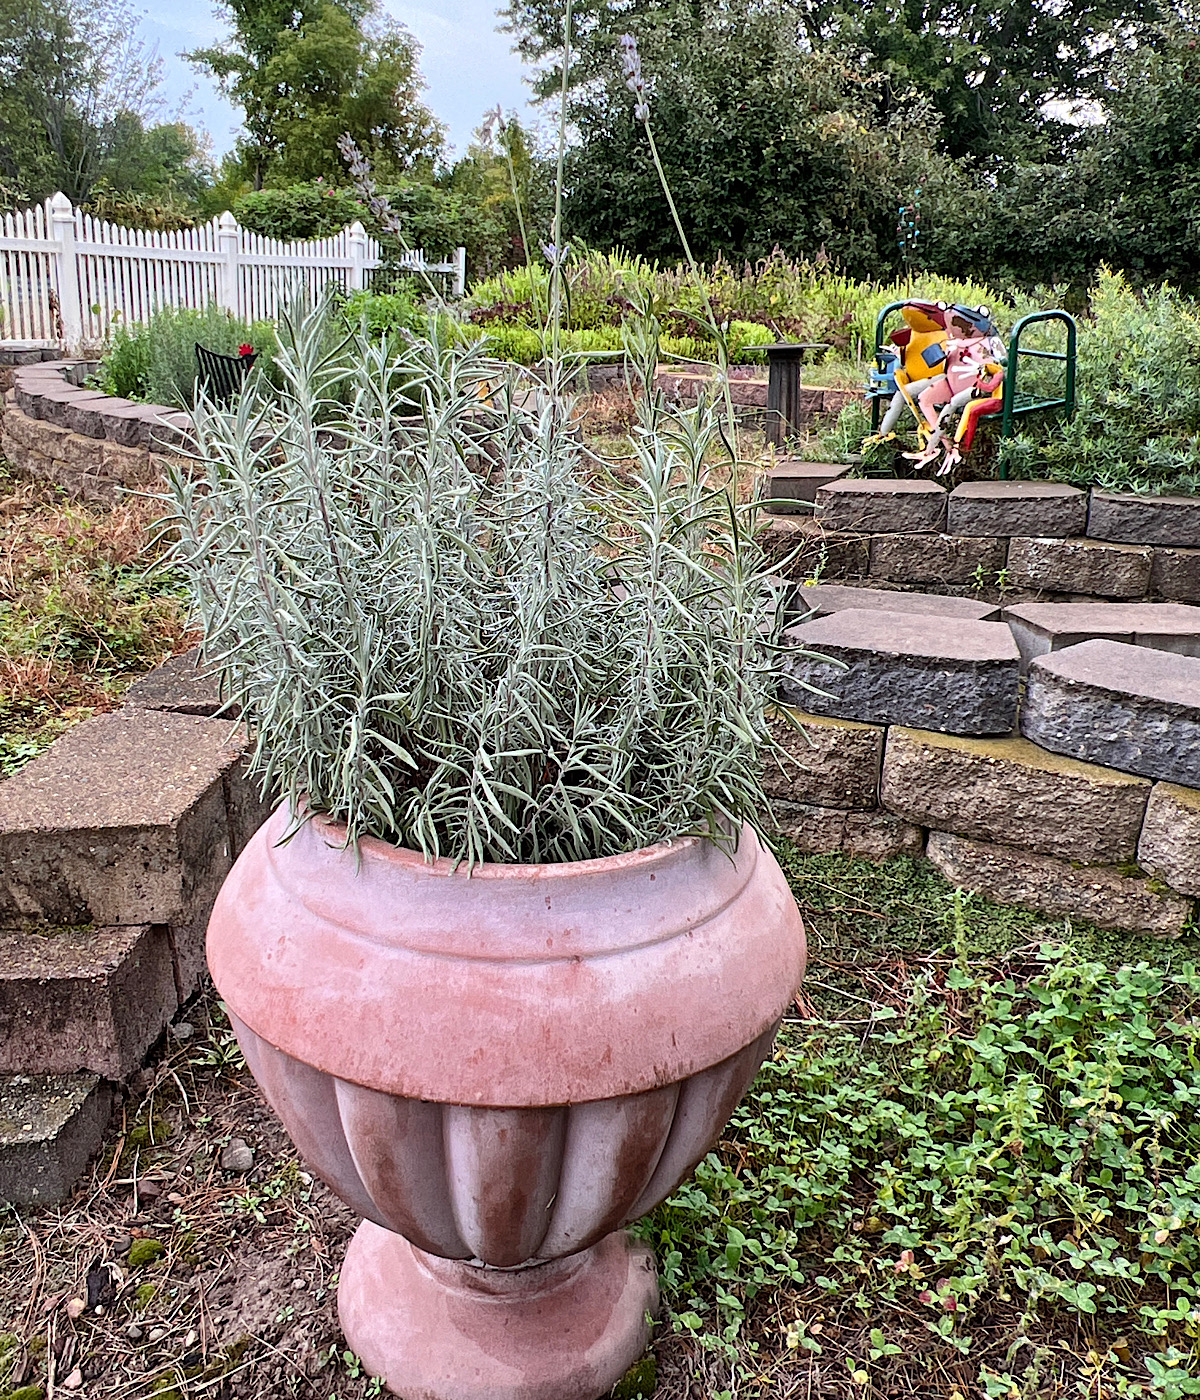 Lavender hidcote plant in large pot in front of herb garden.